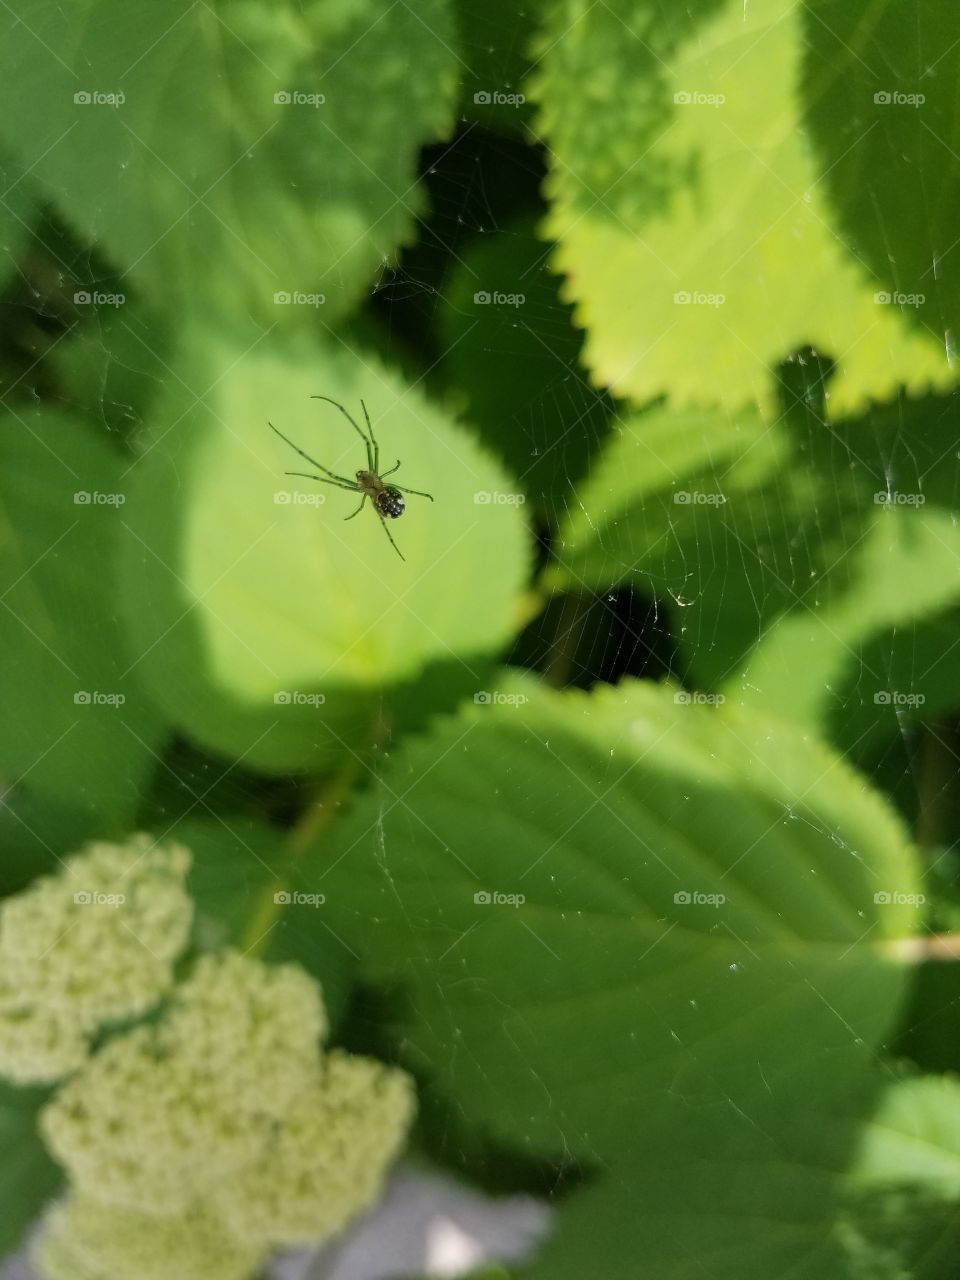 Spider sitting on a web